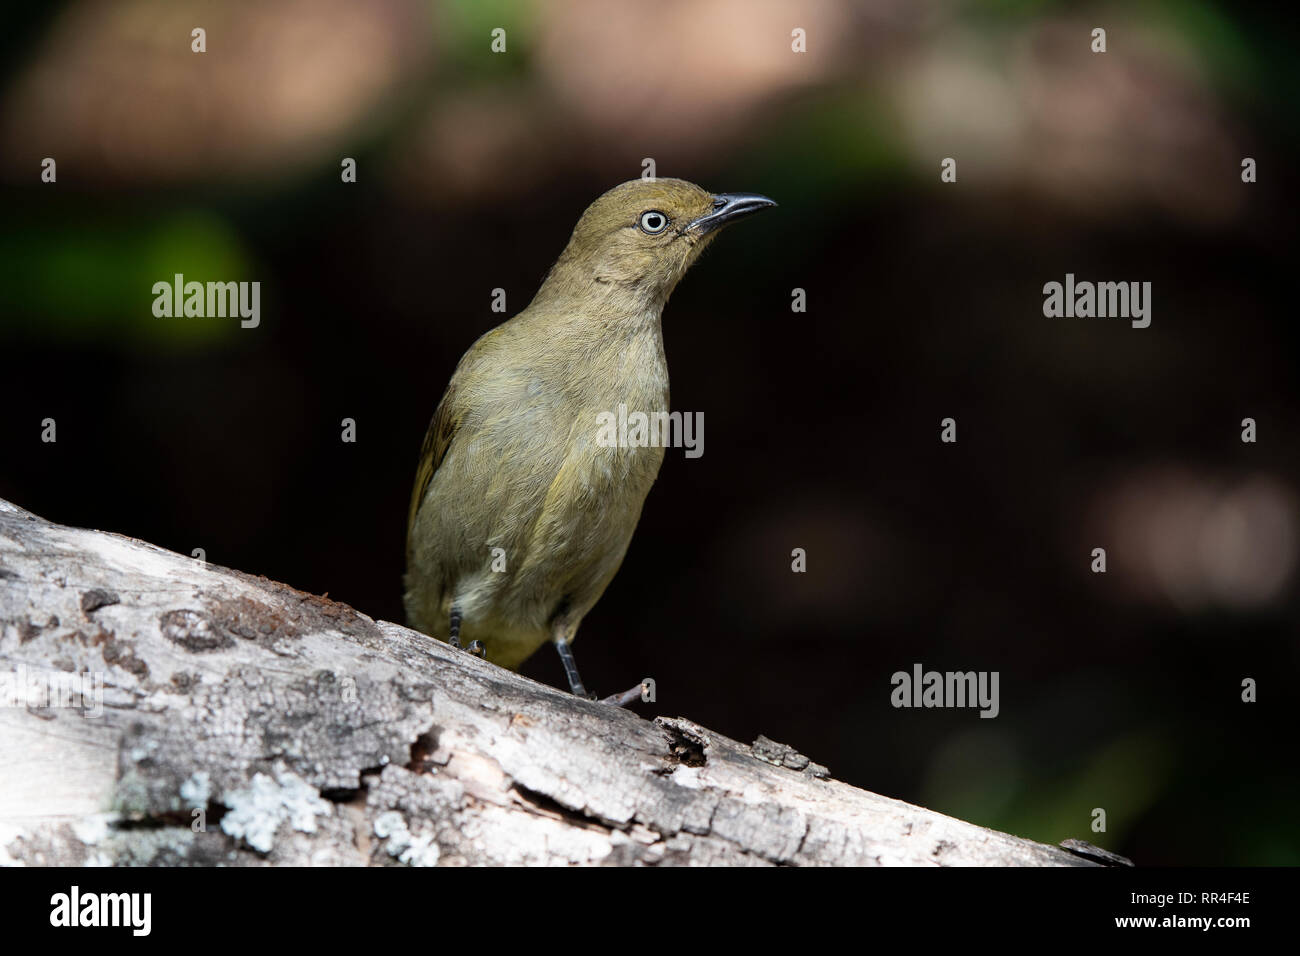 Sombre greenbul, Andropadus importunus, Wilderness, South Africa Stock Photo